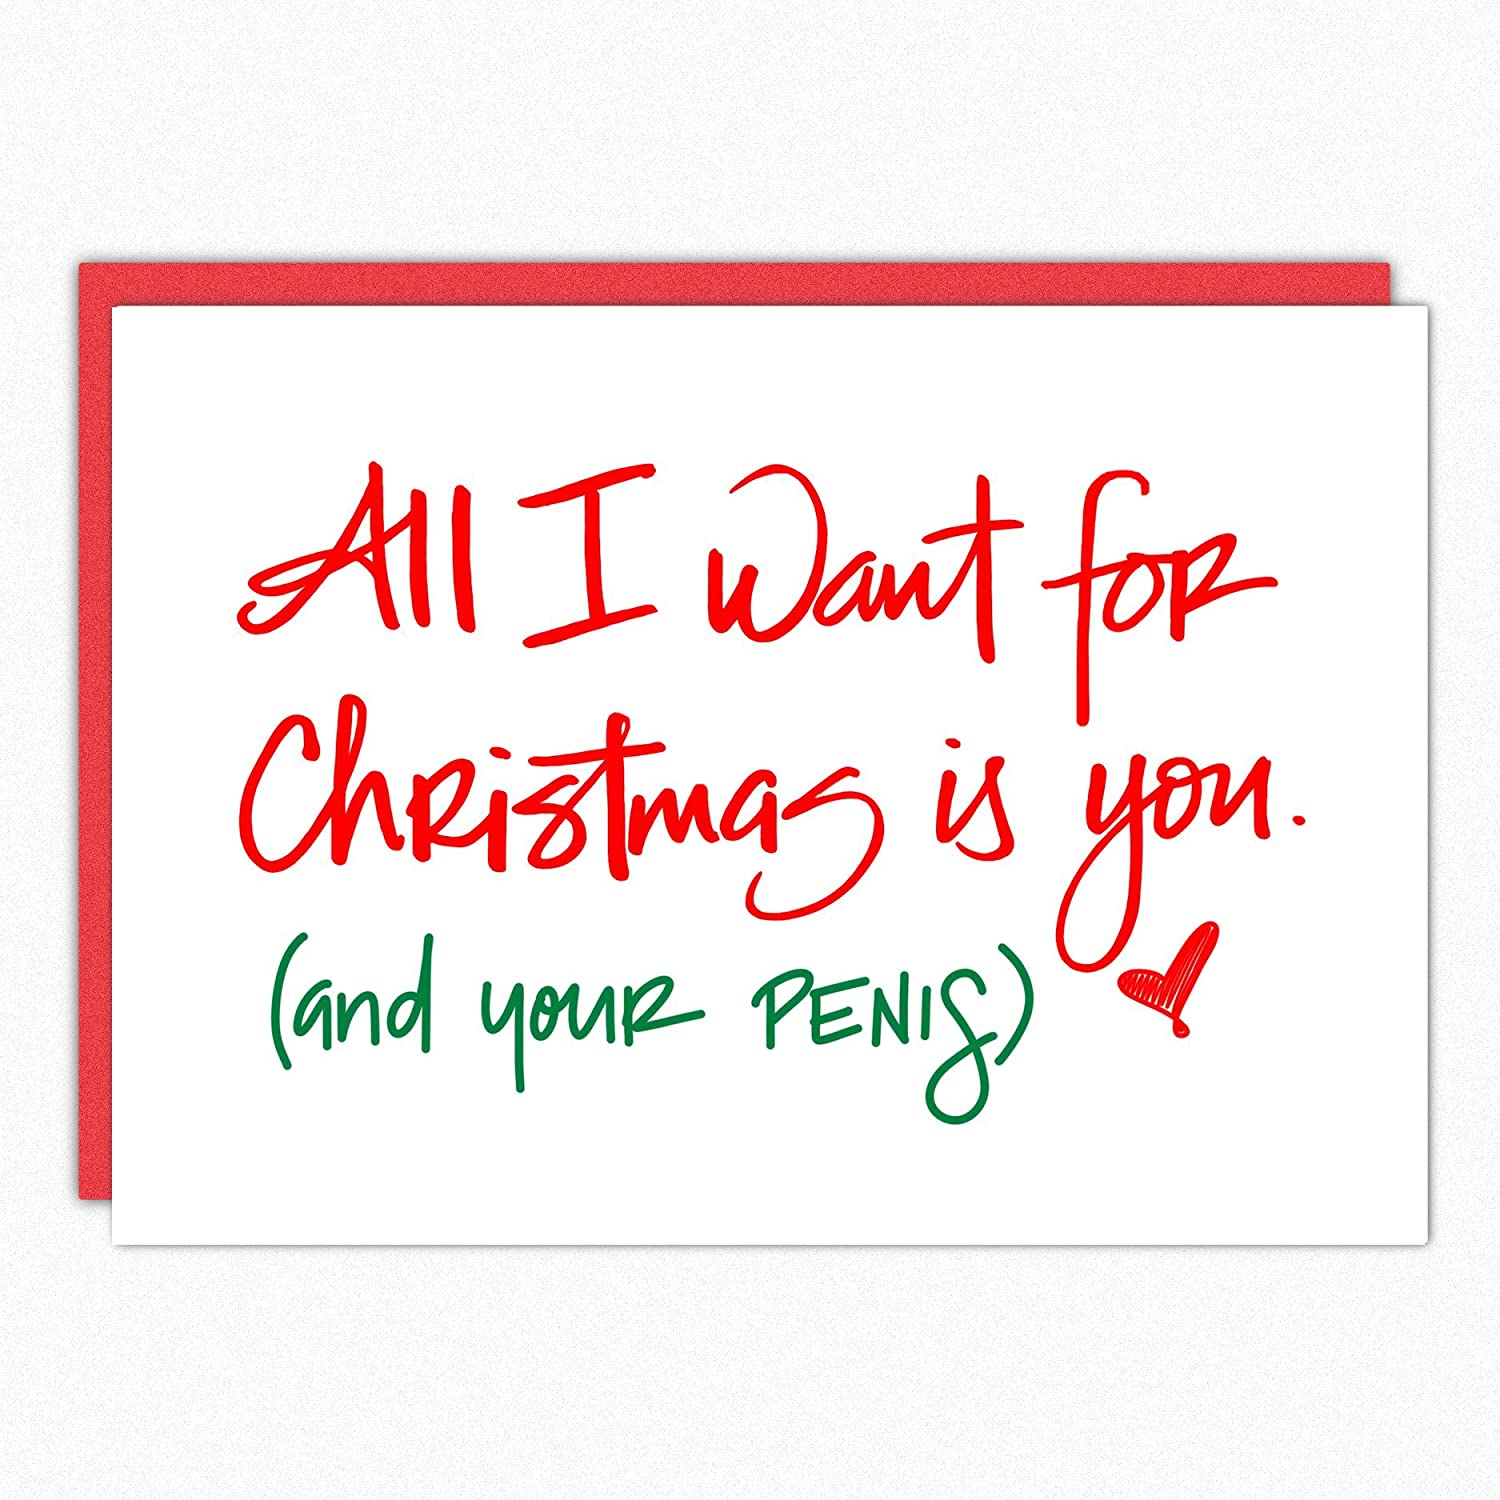 These Naughty Christmas Cards Will Get Your Man Feeling Jolly - Rare